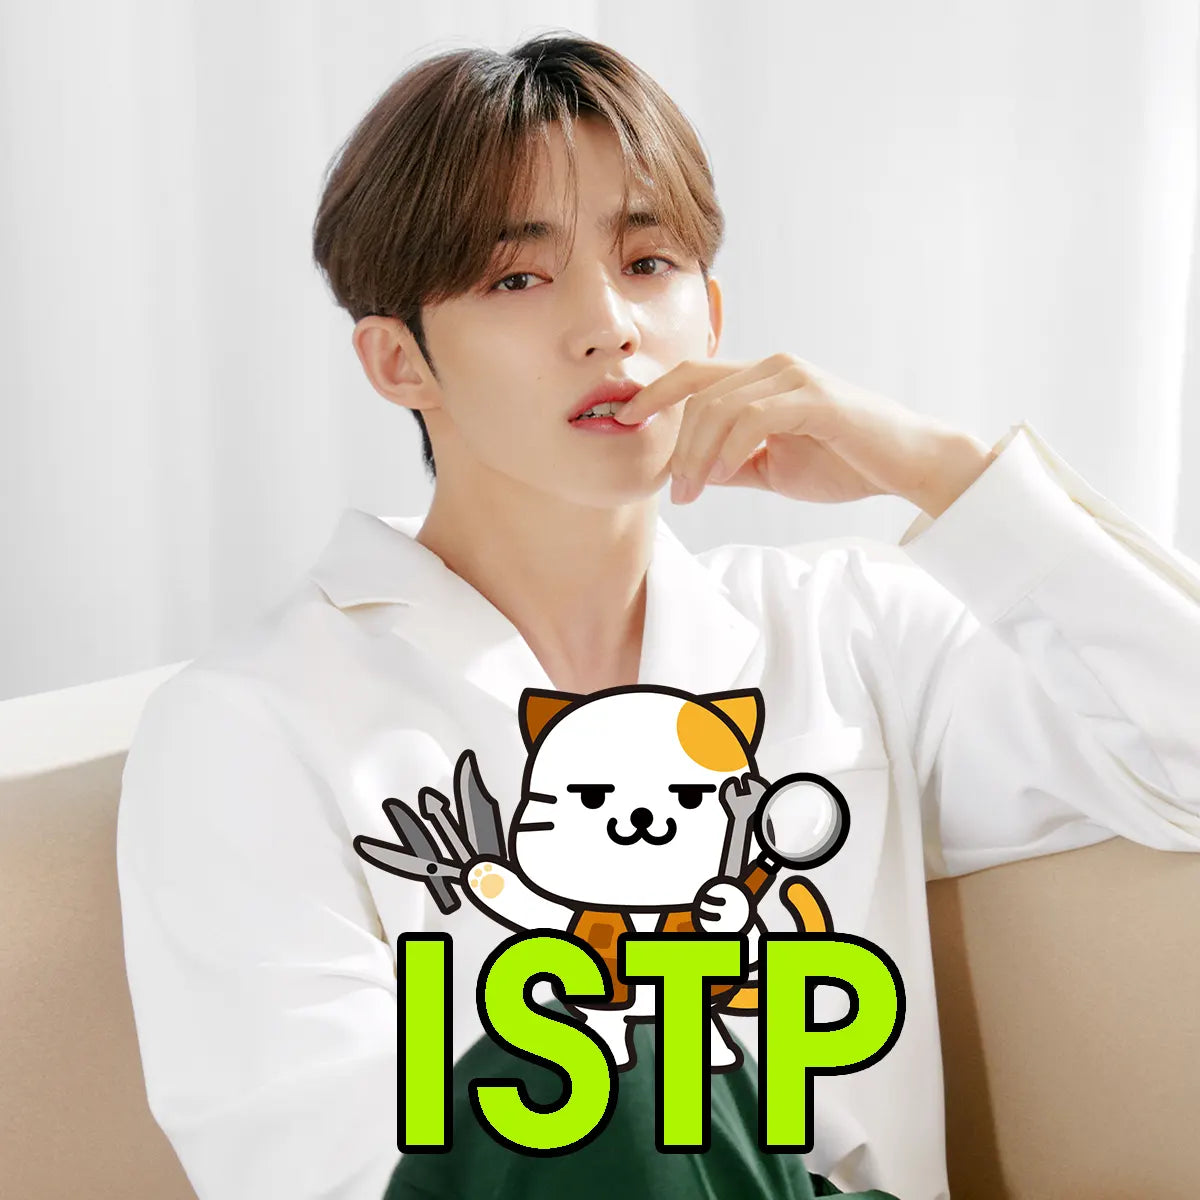 Yoon Bum Personality Type, MBTI - Which Personality?